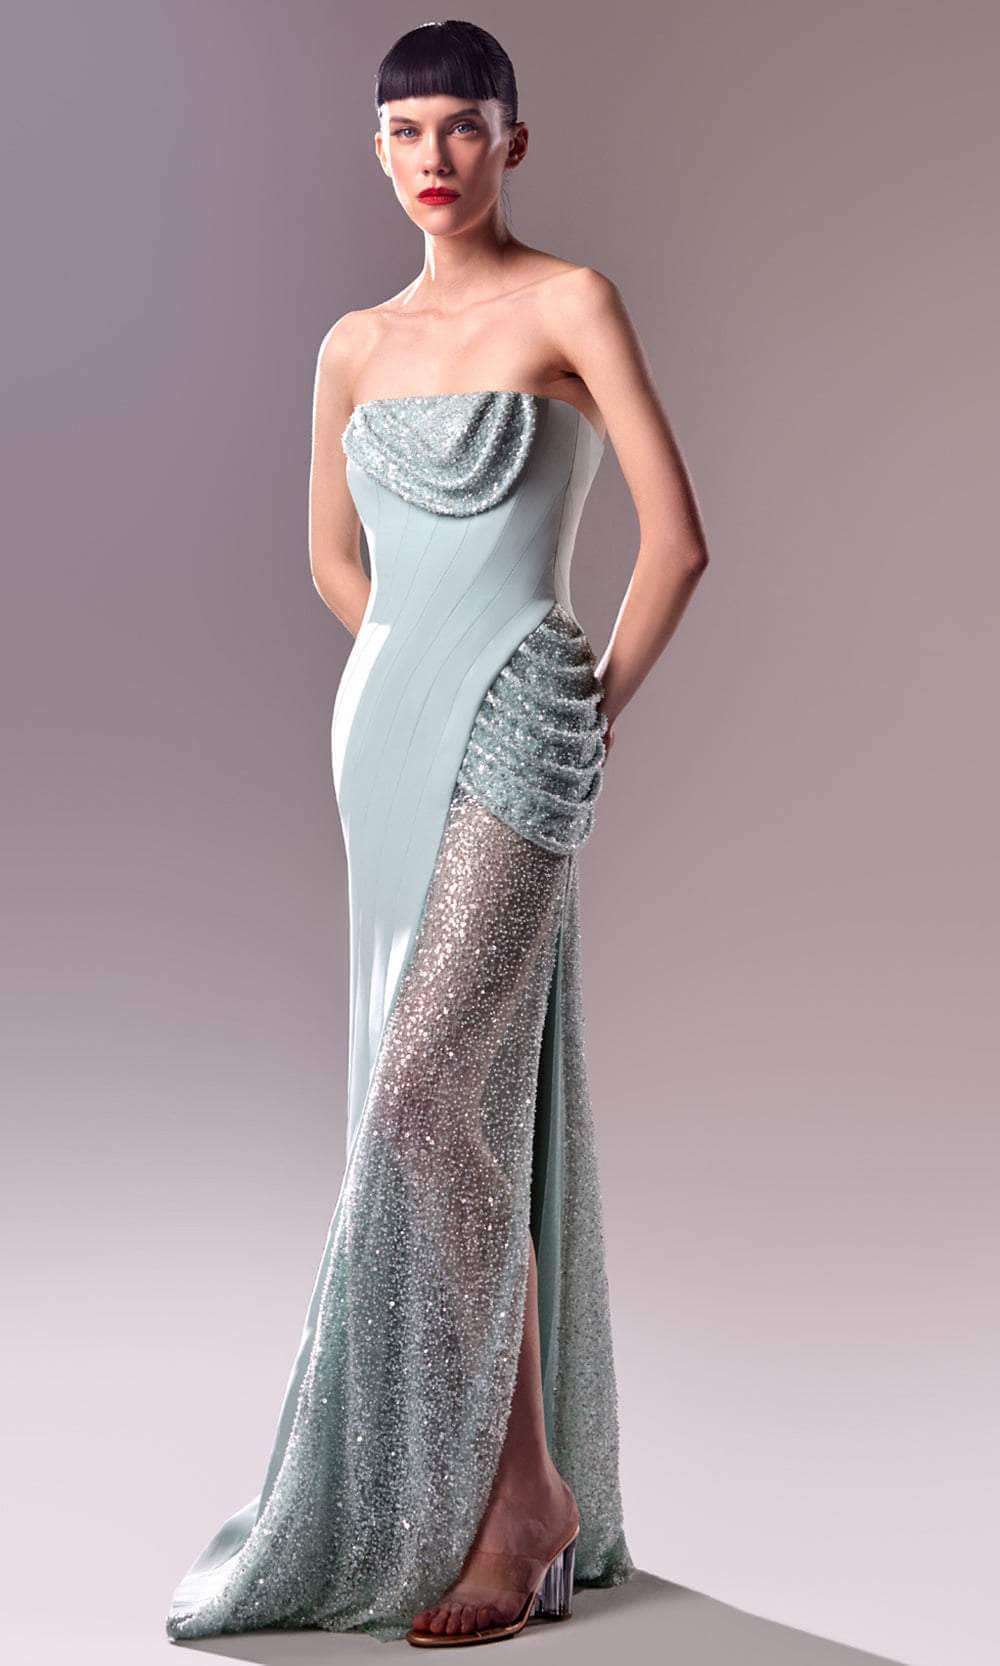 MNM Couture G1613 - Strapless Beaded Mesh Embellished Gown
